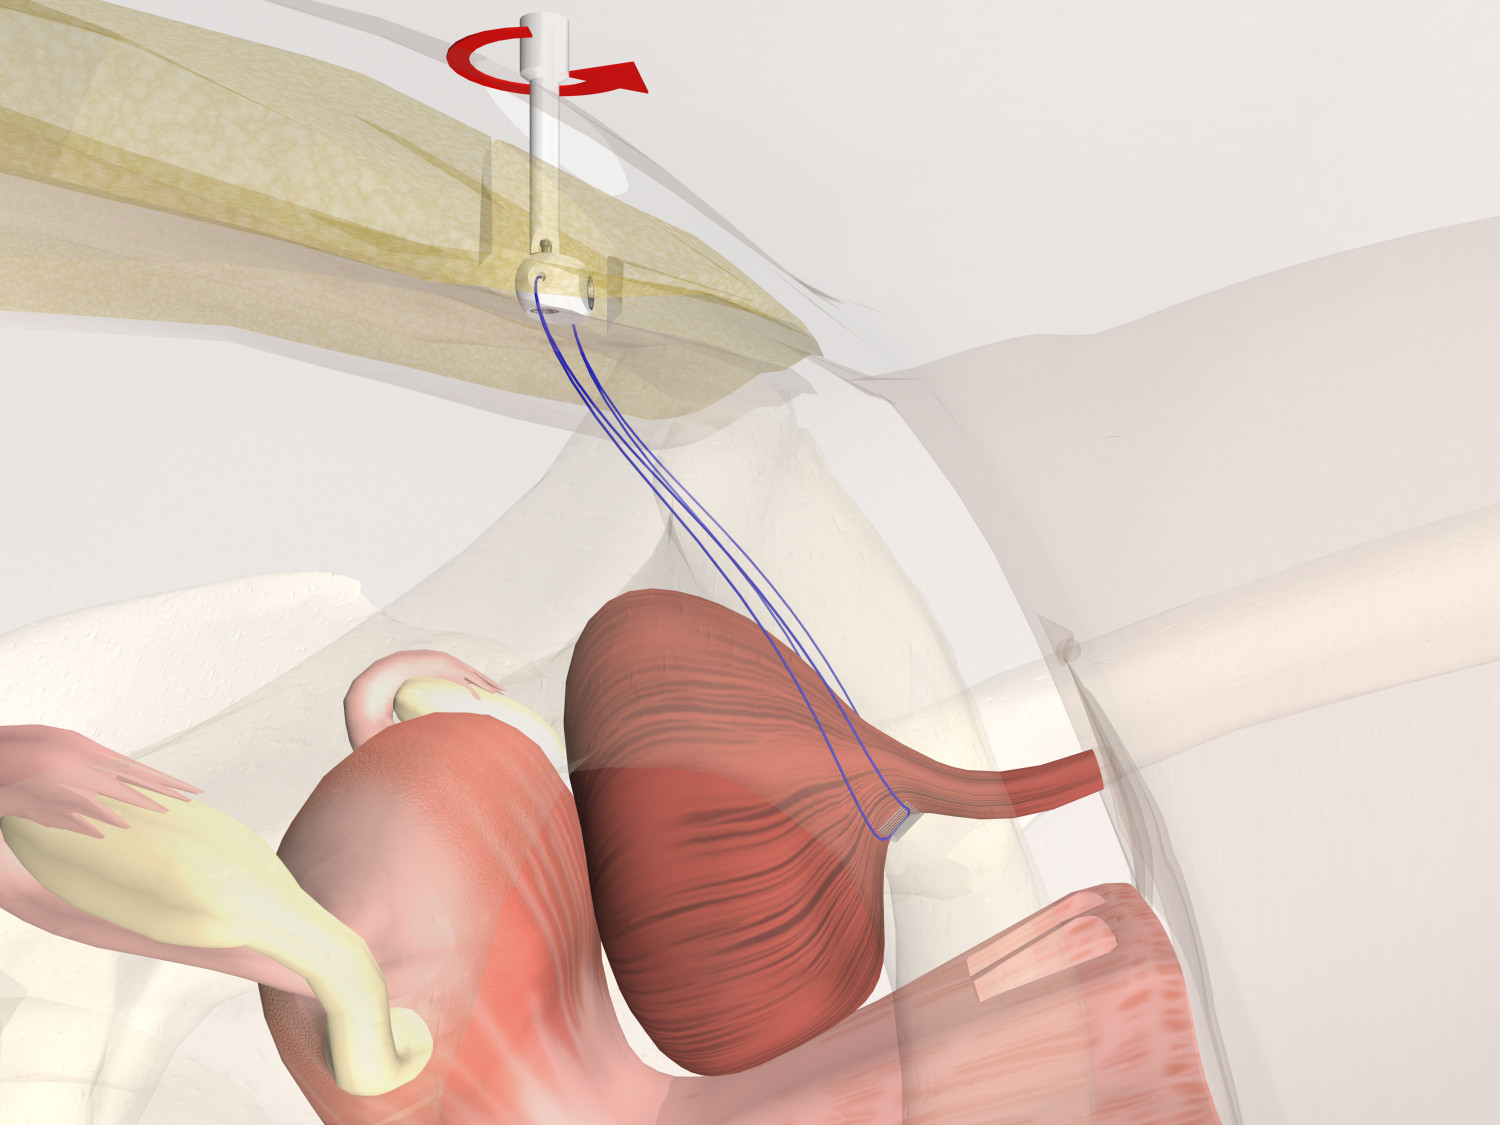 Urinary Incontinence Surgeries (Remeex)